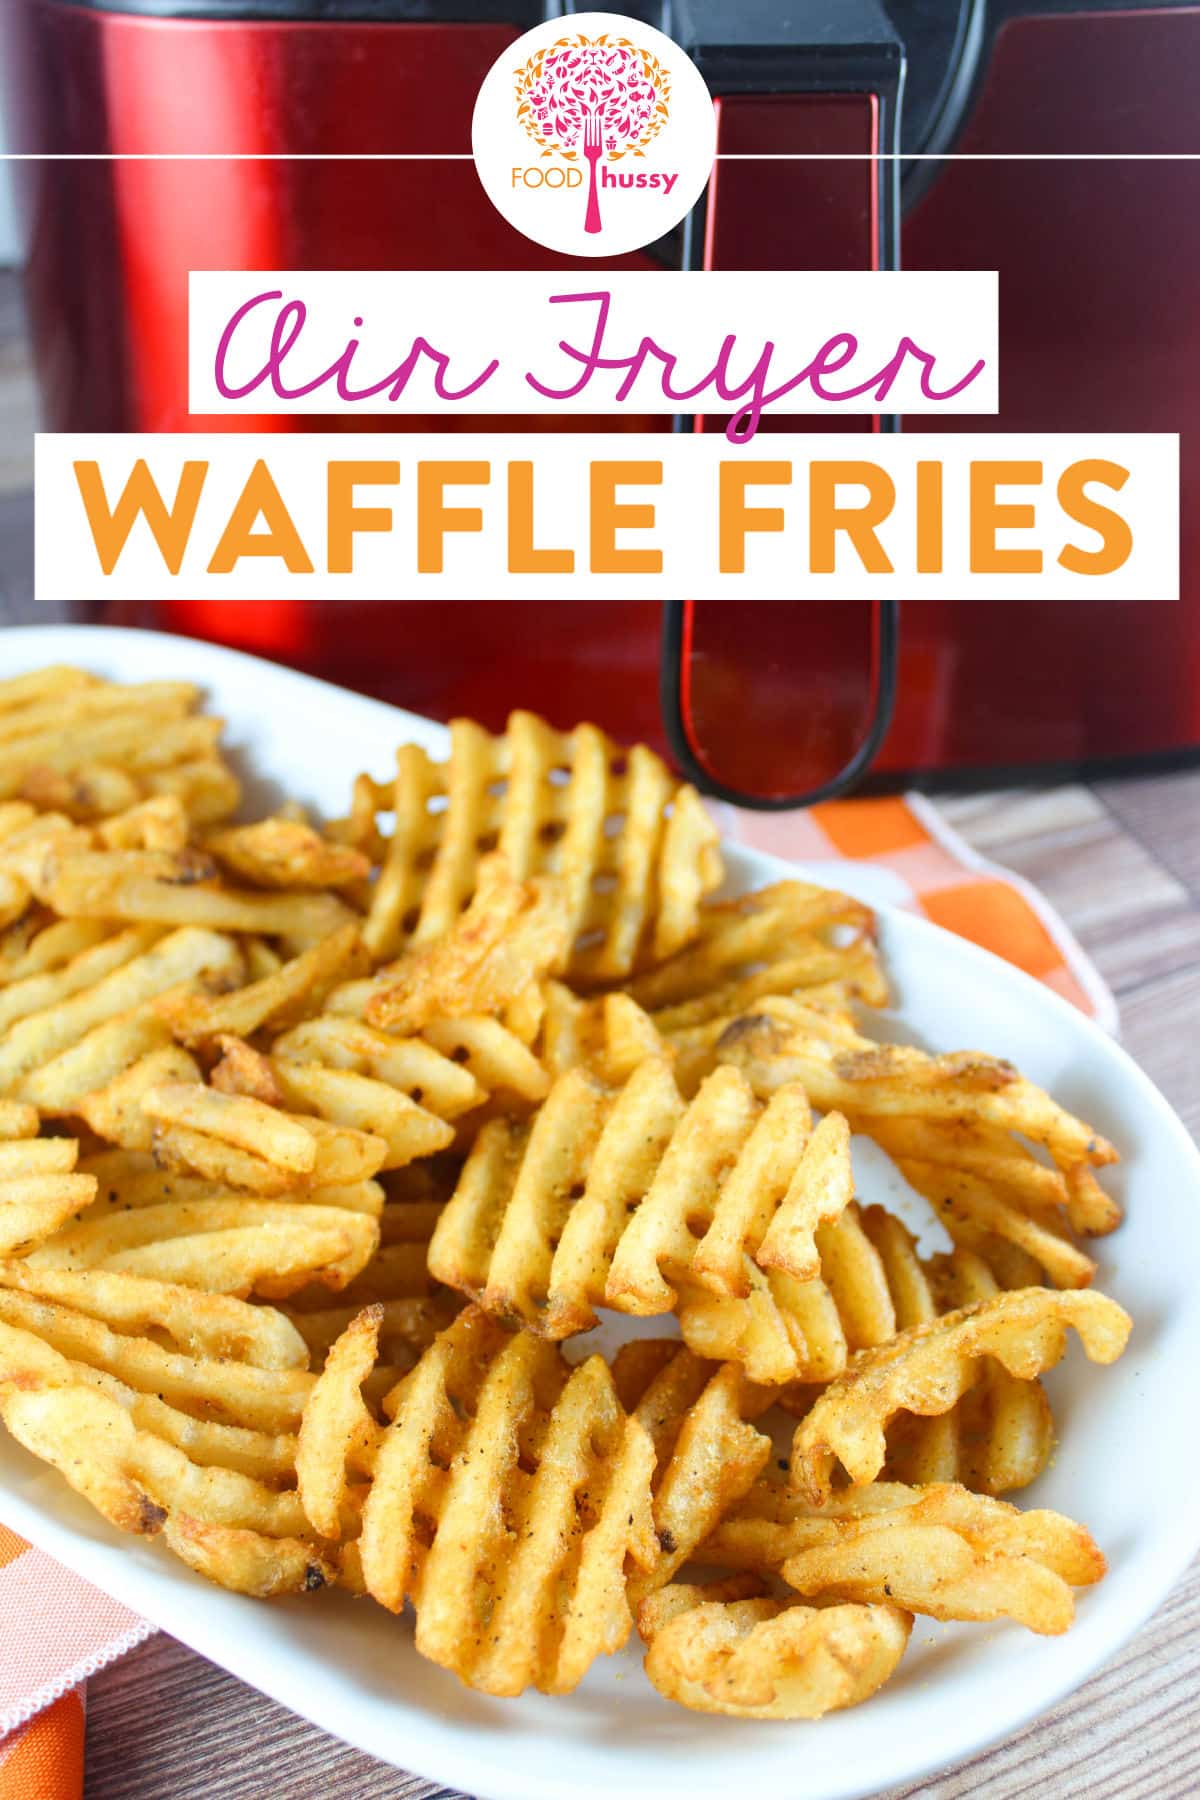 Air Fryer Waffle Fries make a great side dish, snack or appetizer! Serve alongside your favorite burger or make them into bacon ranch cheese fries for homemade loaded fries! via @foodhussy